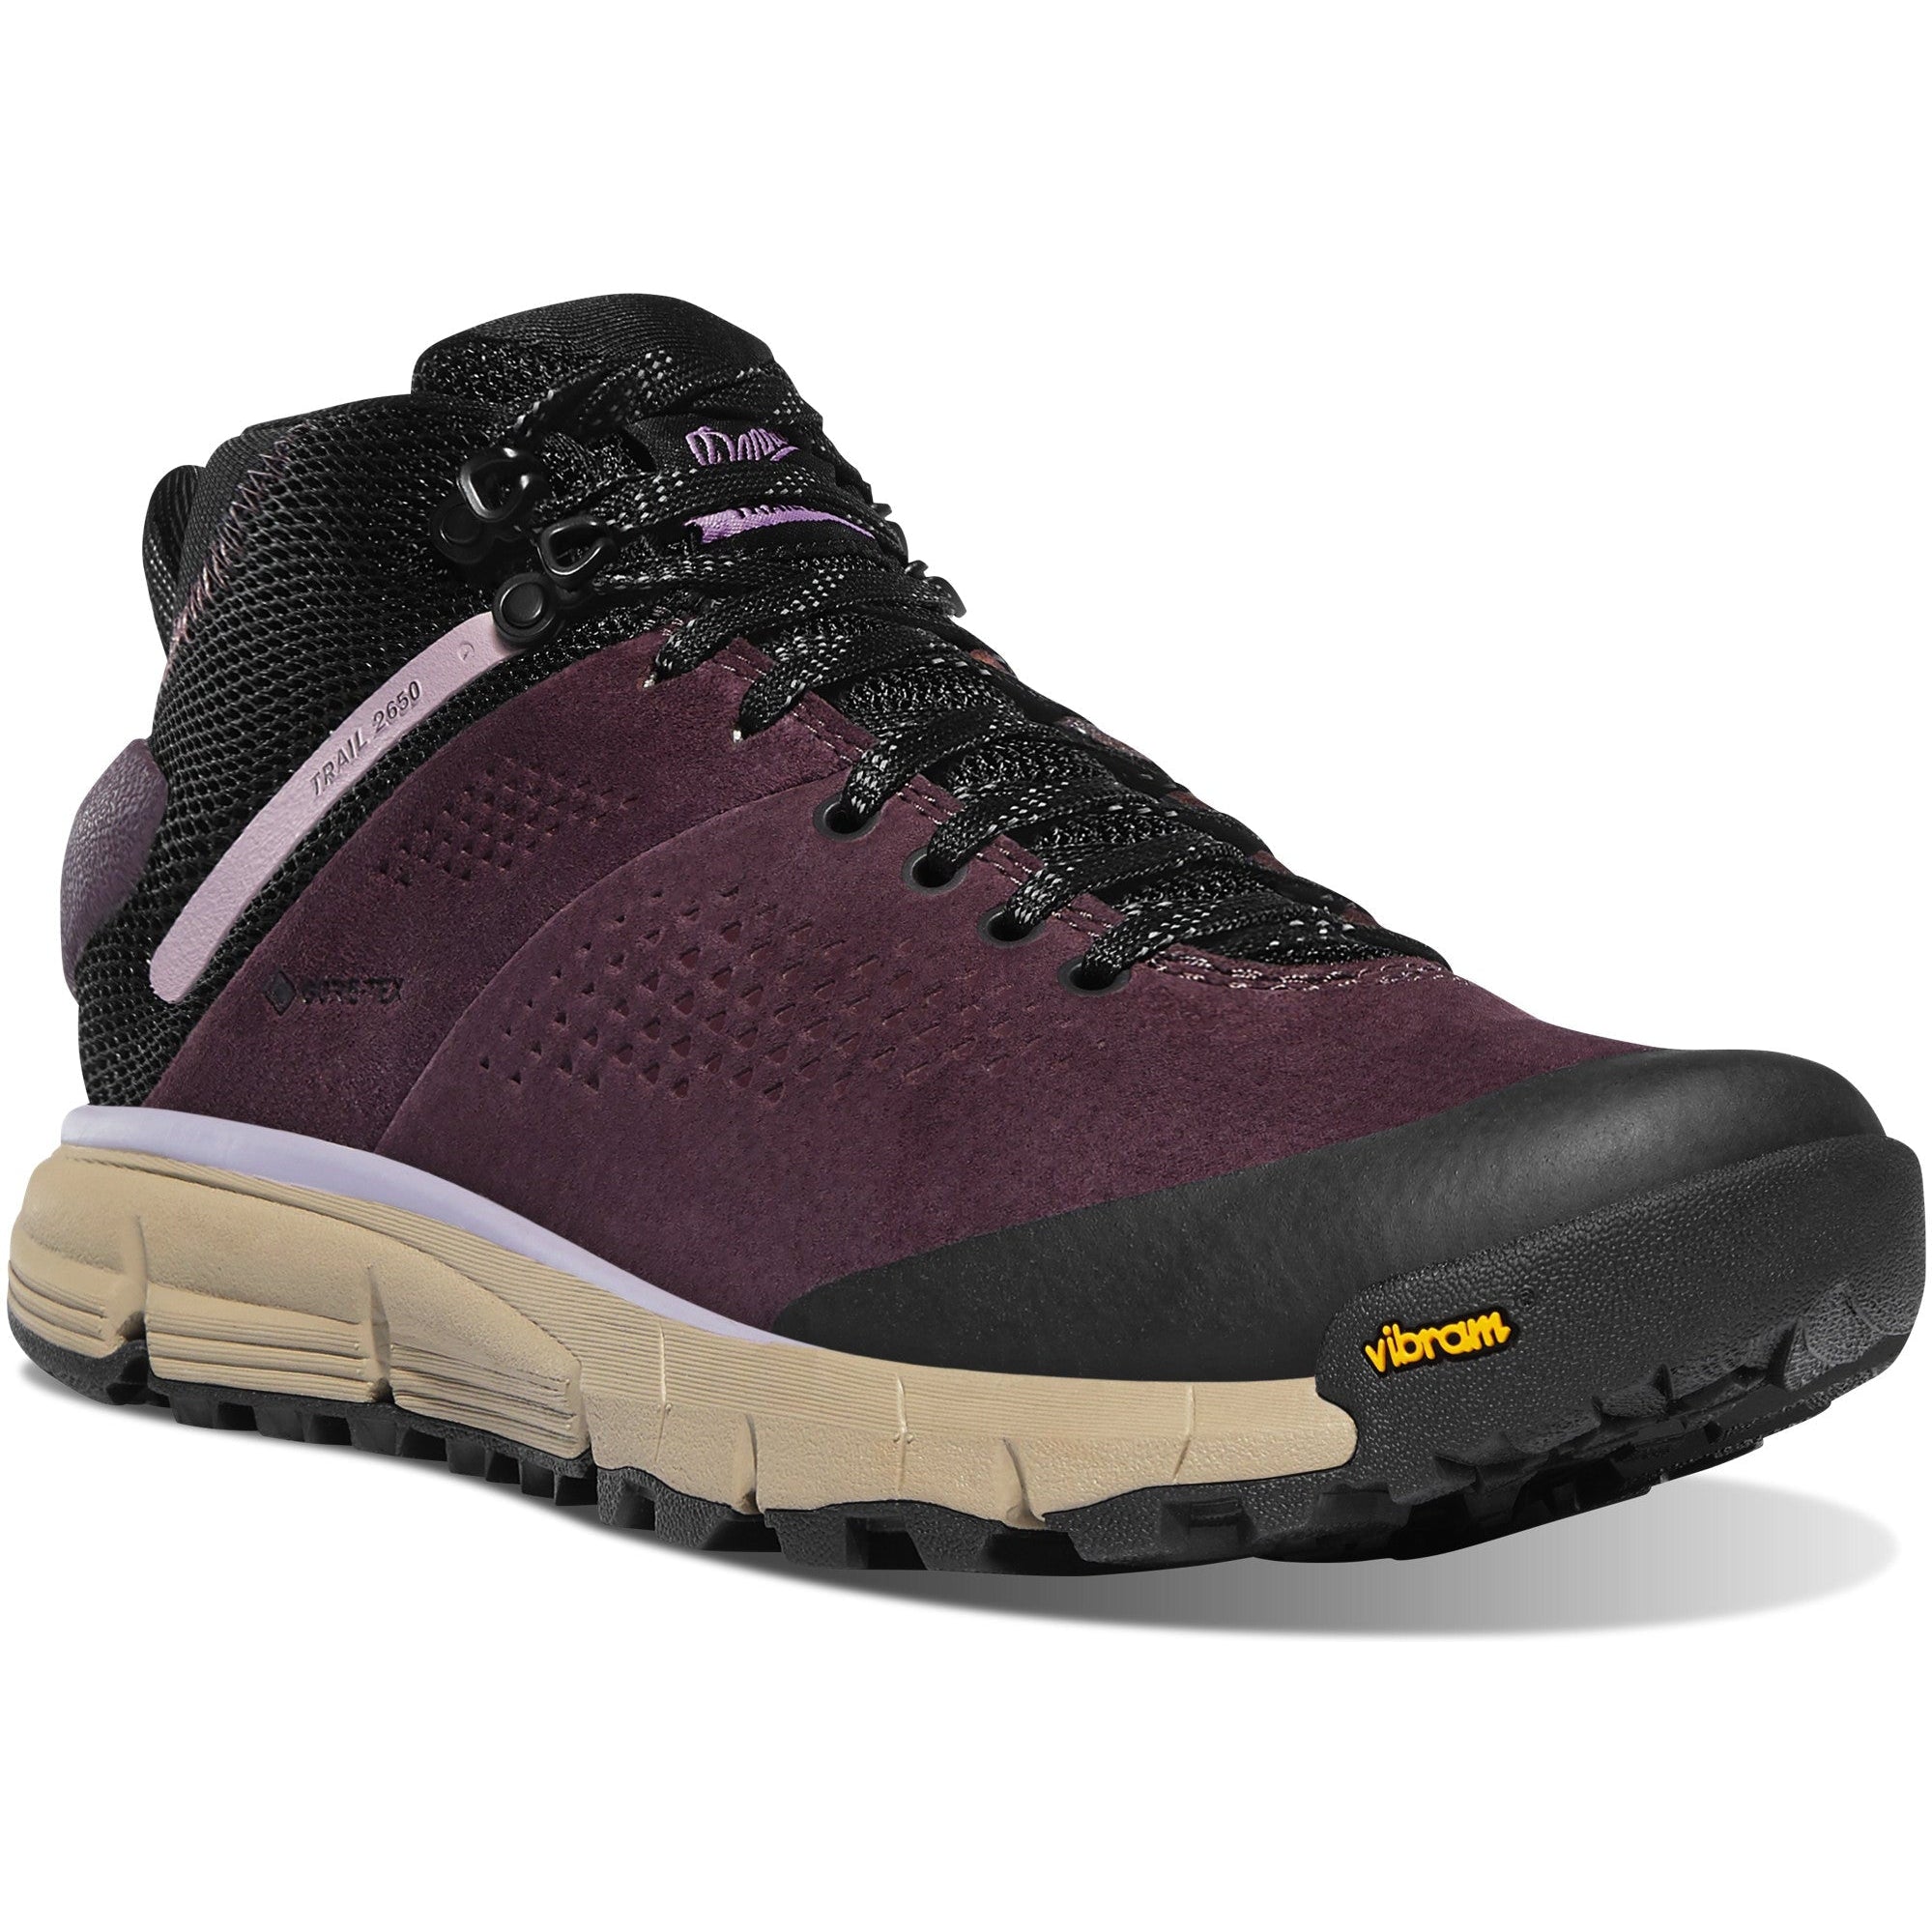 Danner Trail 2650 Hiking Shoes - Women's